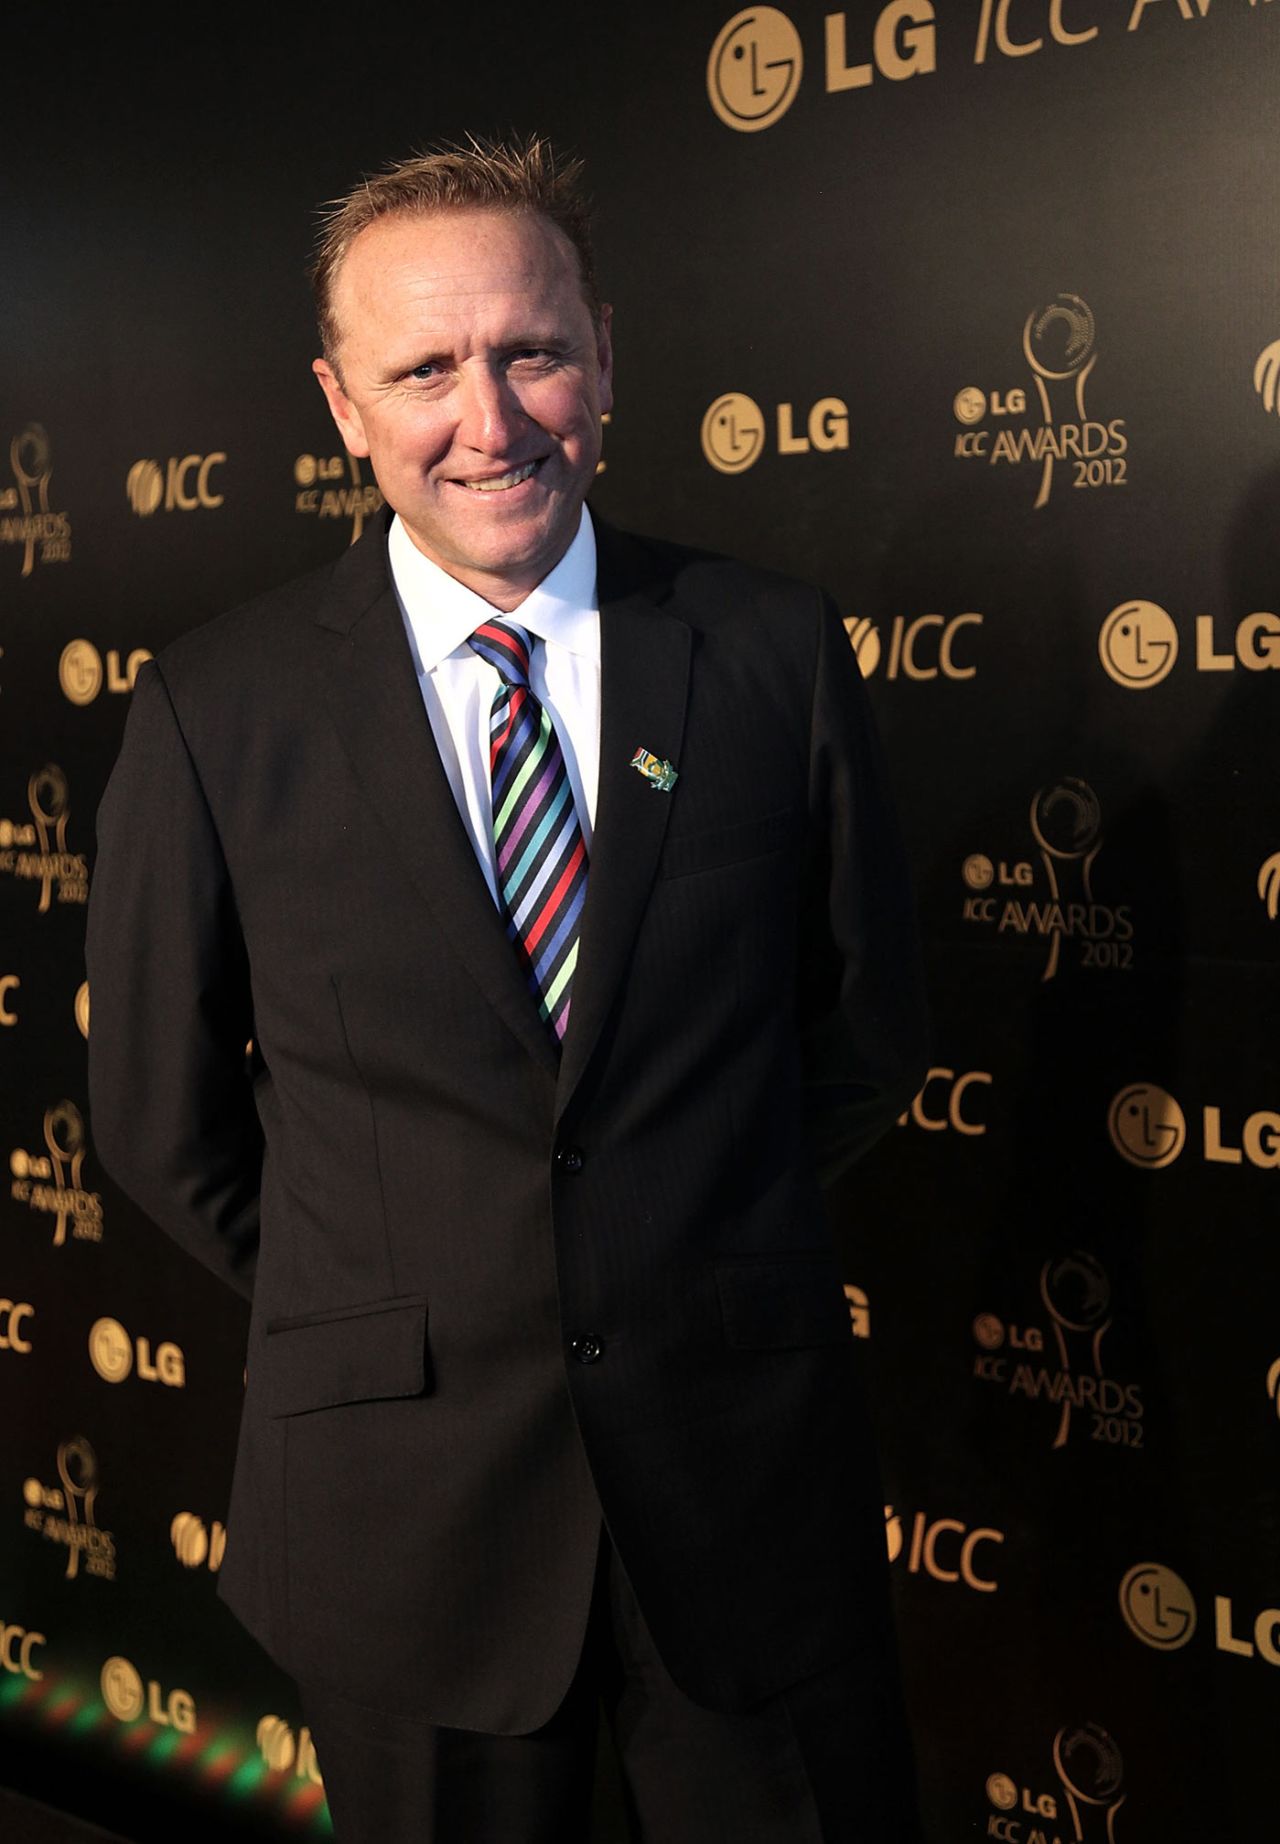 Allan Donald at the ICC Awards ceremony, Colombo, September 15, 2012